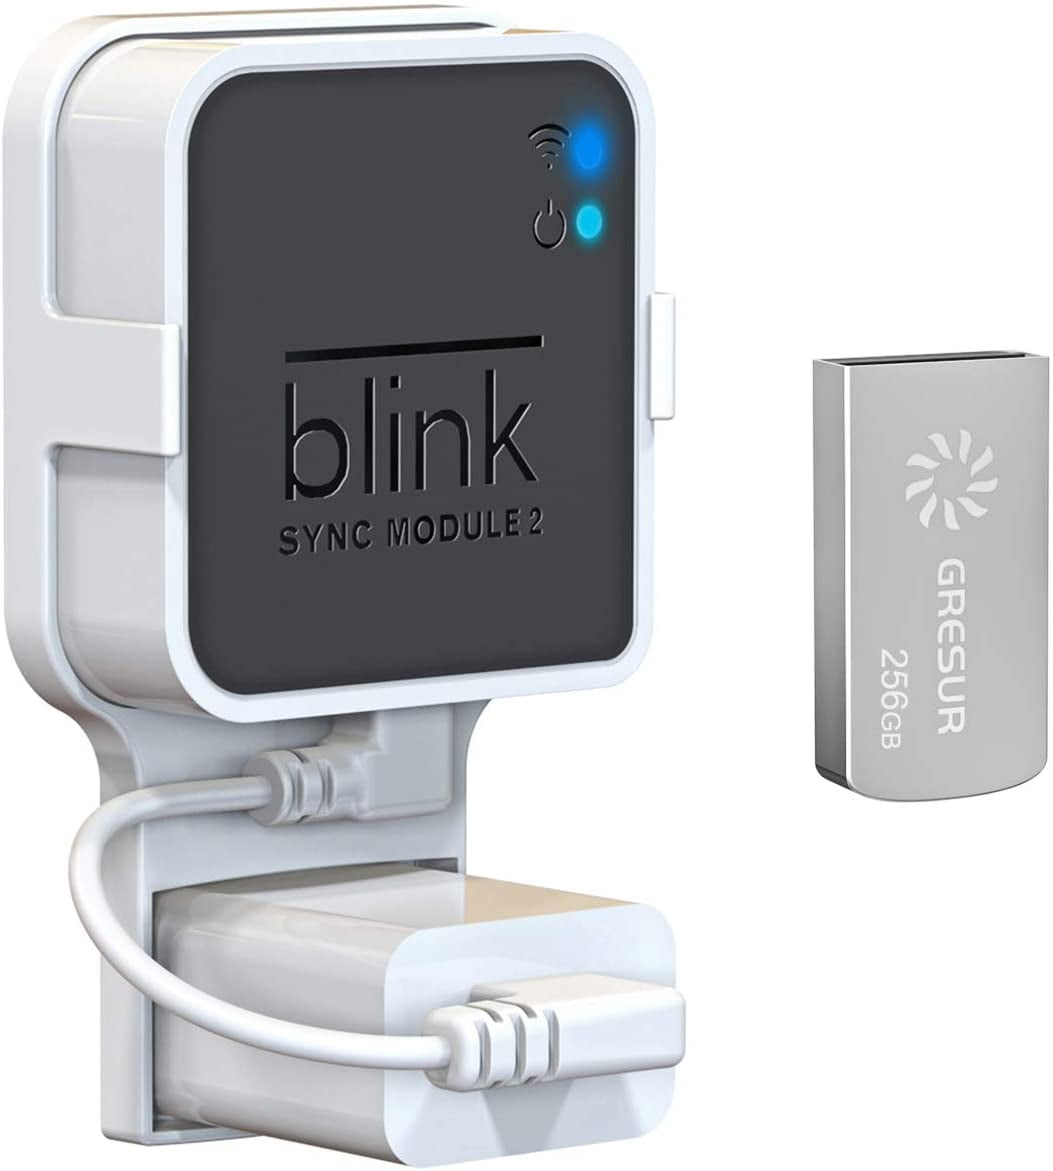 Gresur UP256GB 256GB Blink USB Flash Drive for Local Video Storage with The Blink  Sync Module 2 Mount (Blink Add-On Sync Module 2 is NOT Includ